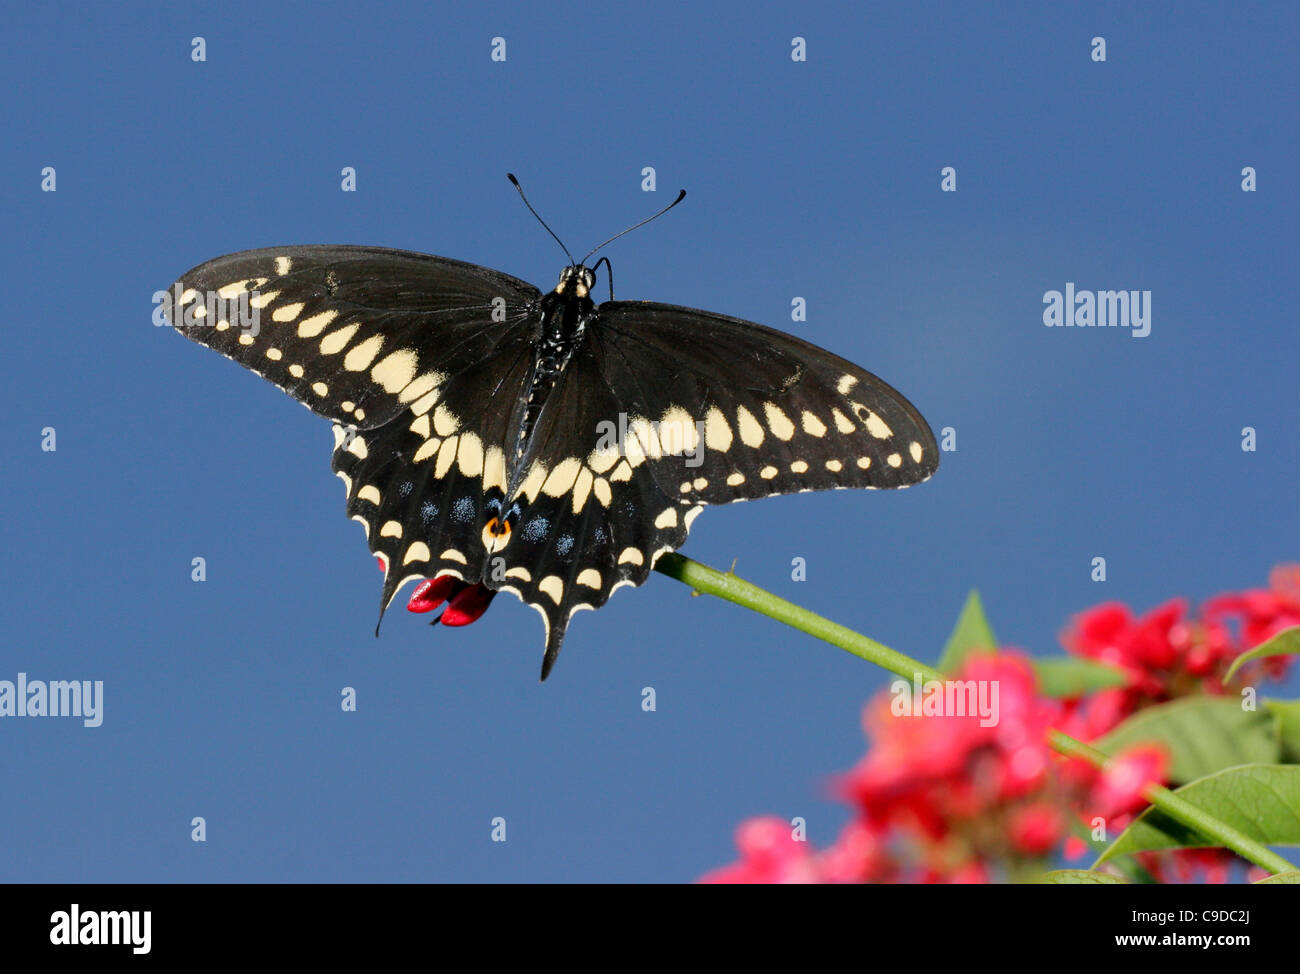 Low angle view of a Black Swallowtail Butterfly on a twig (Papilio polyxenes) Stock Photo